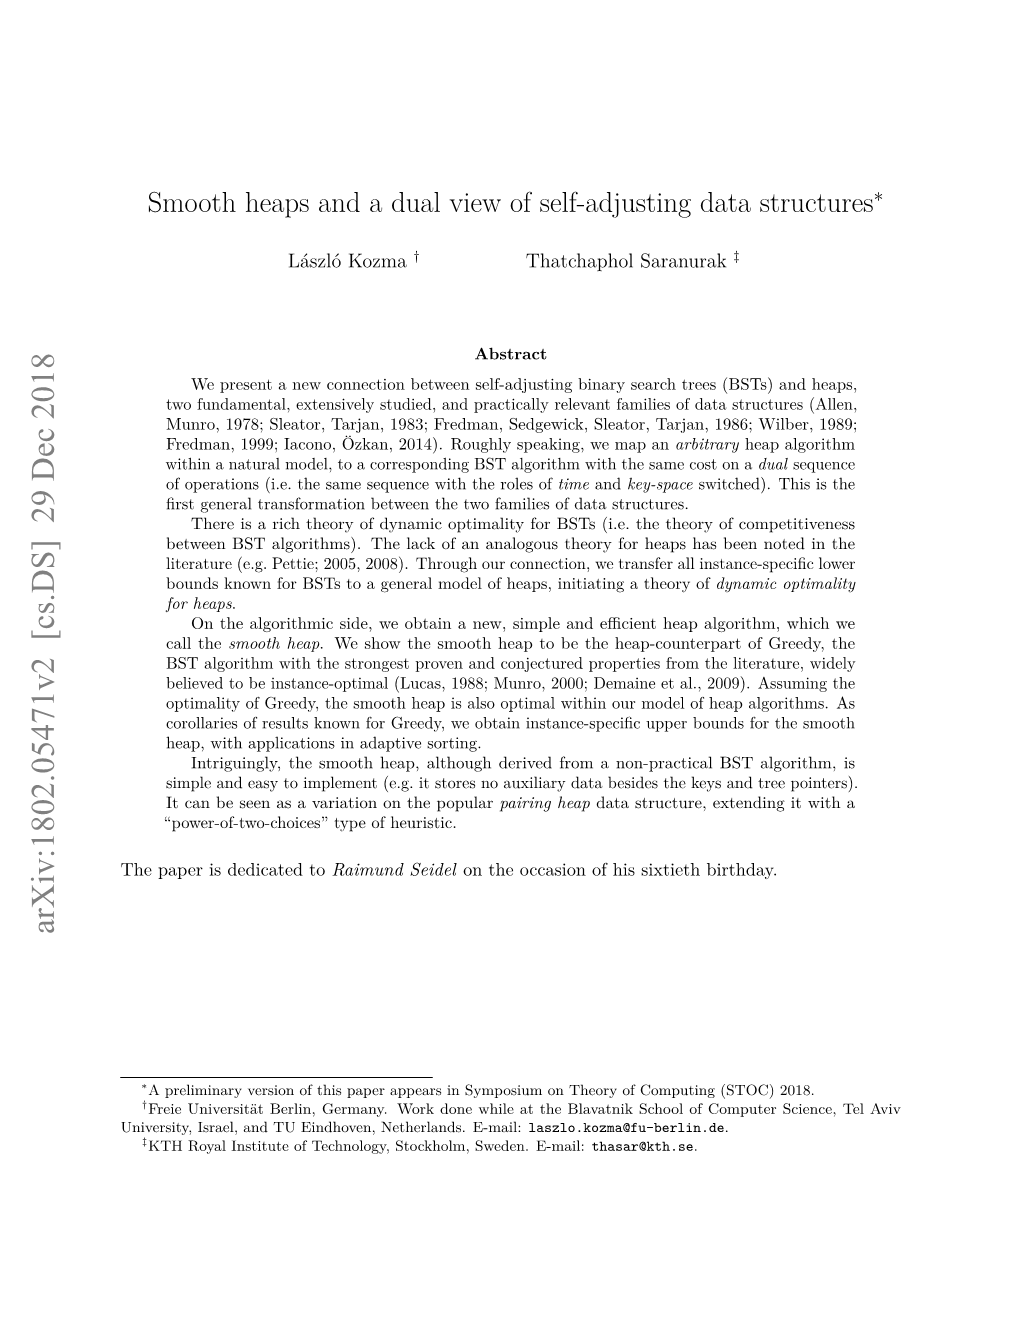 Smooth Heaps and a Dual View of Self-Adjusting Data Structures∗